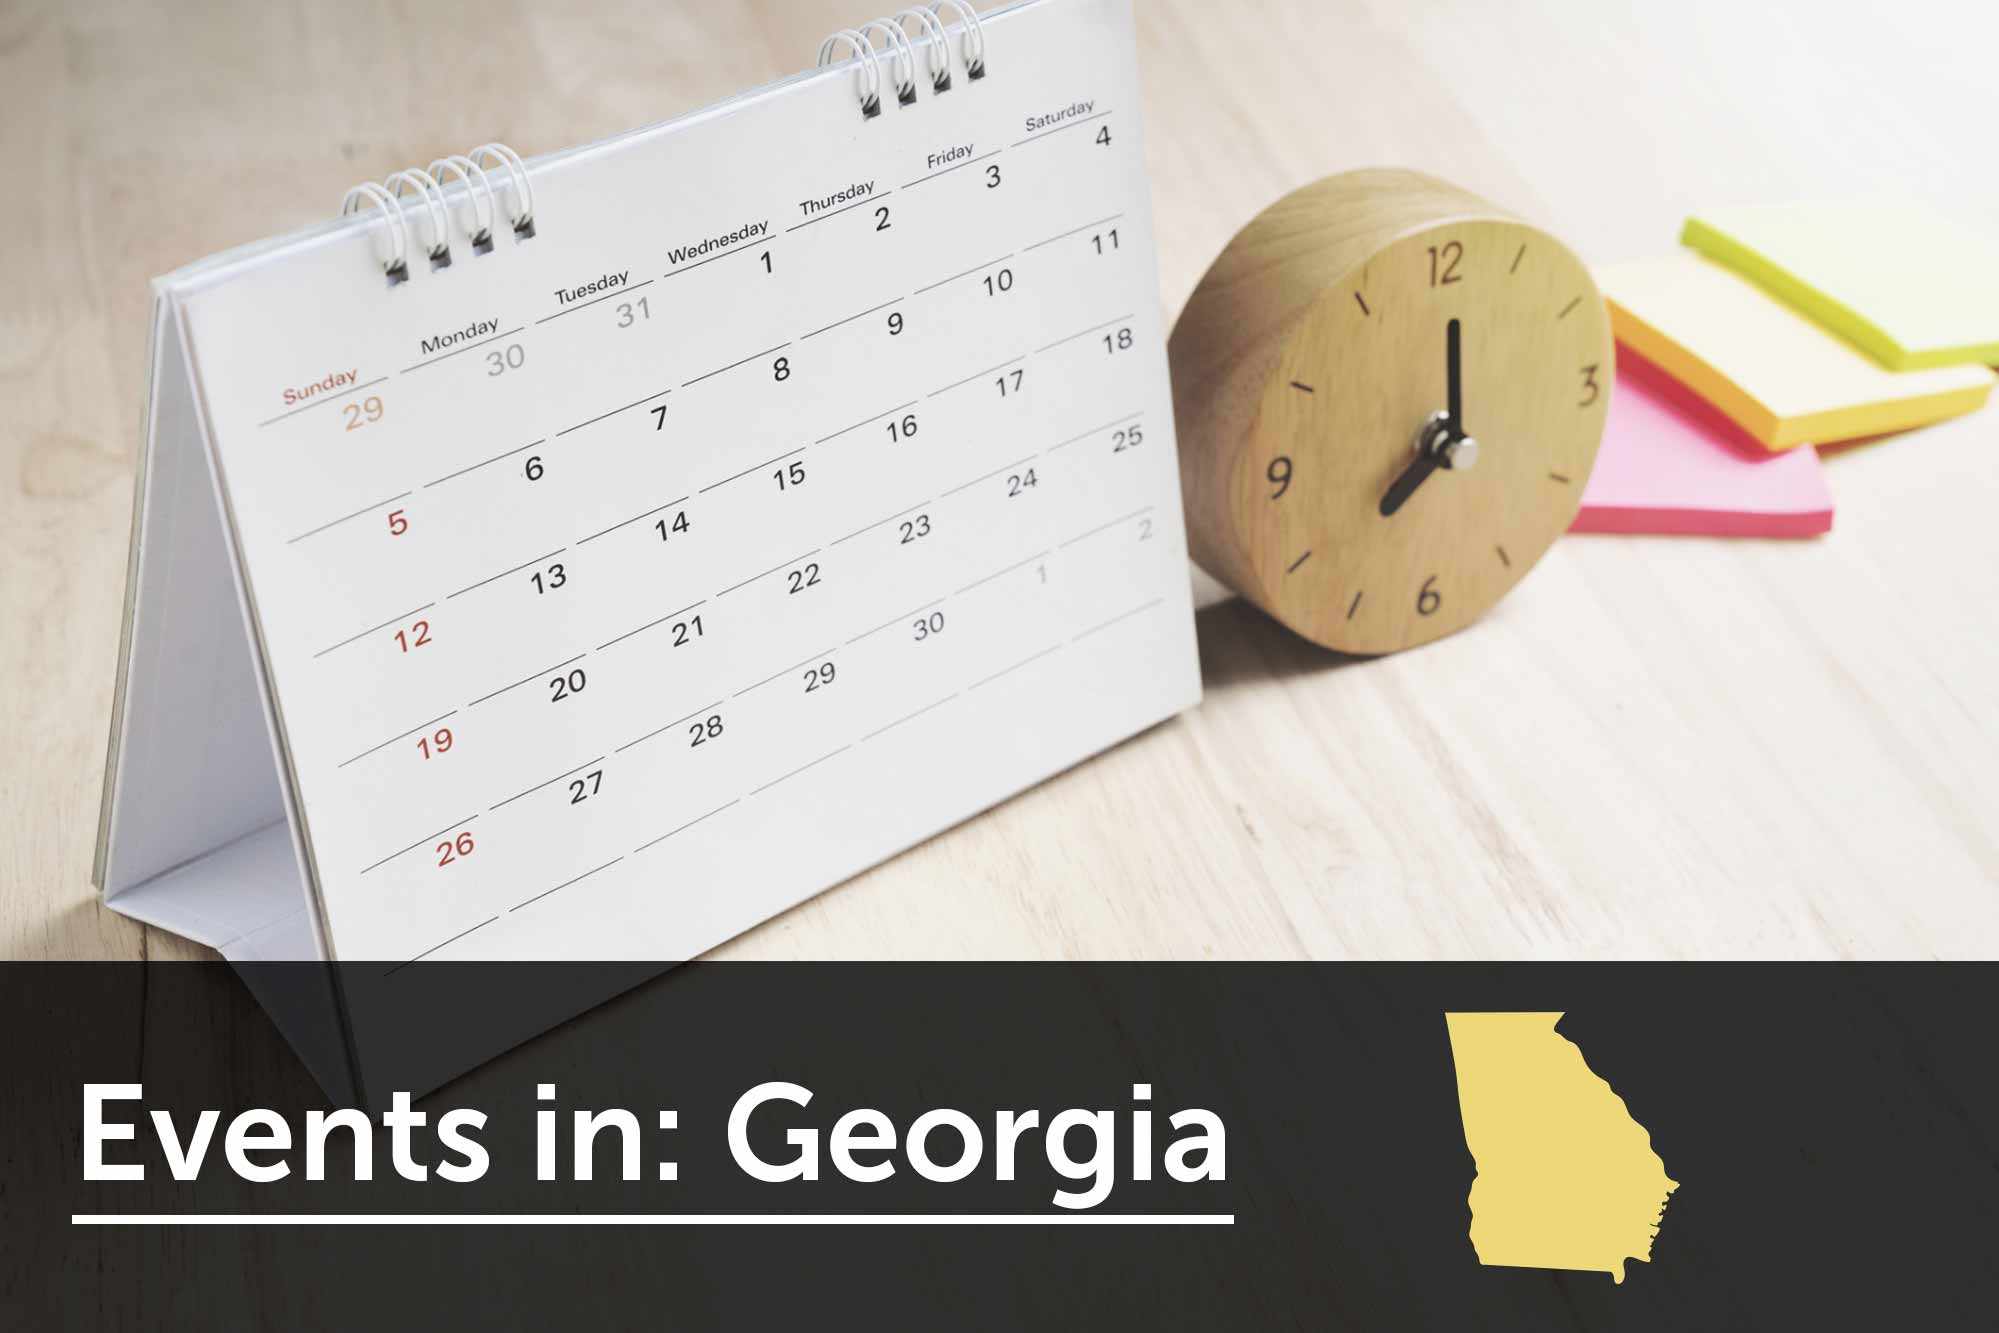 Women's business events in Georgia